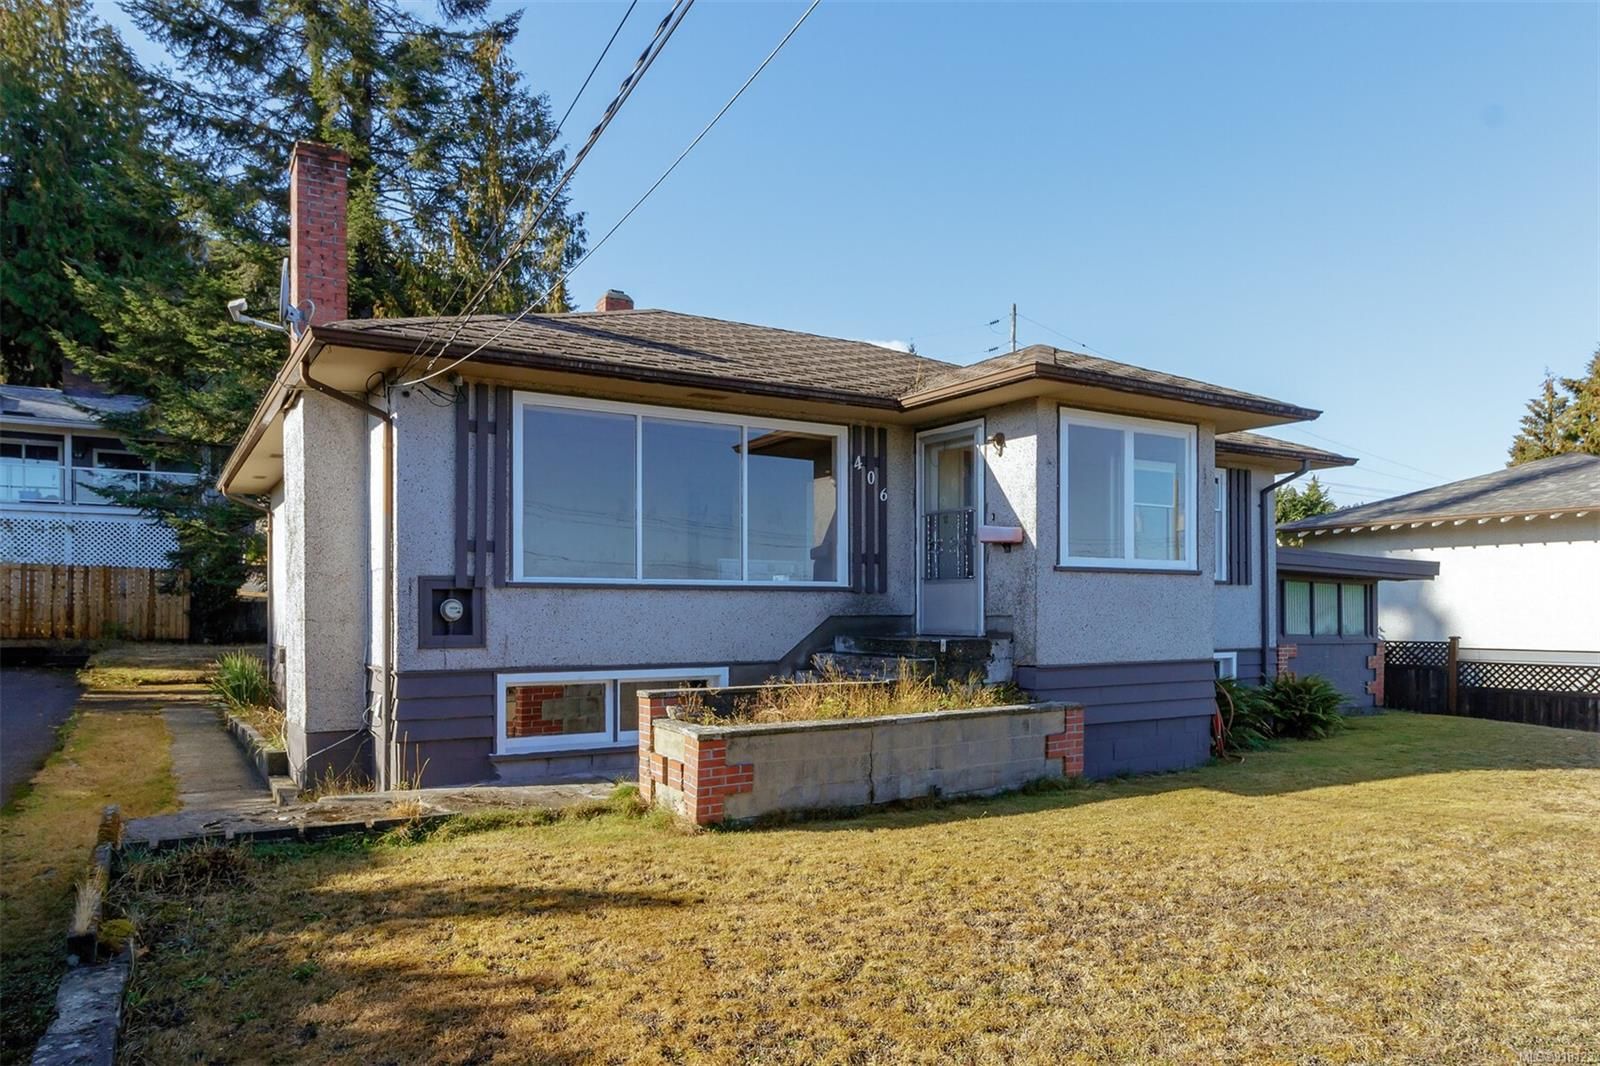 I have sold a property at 406 Walker Ave in Ladysmith
